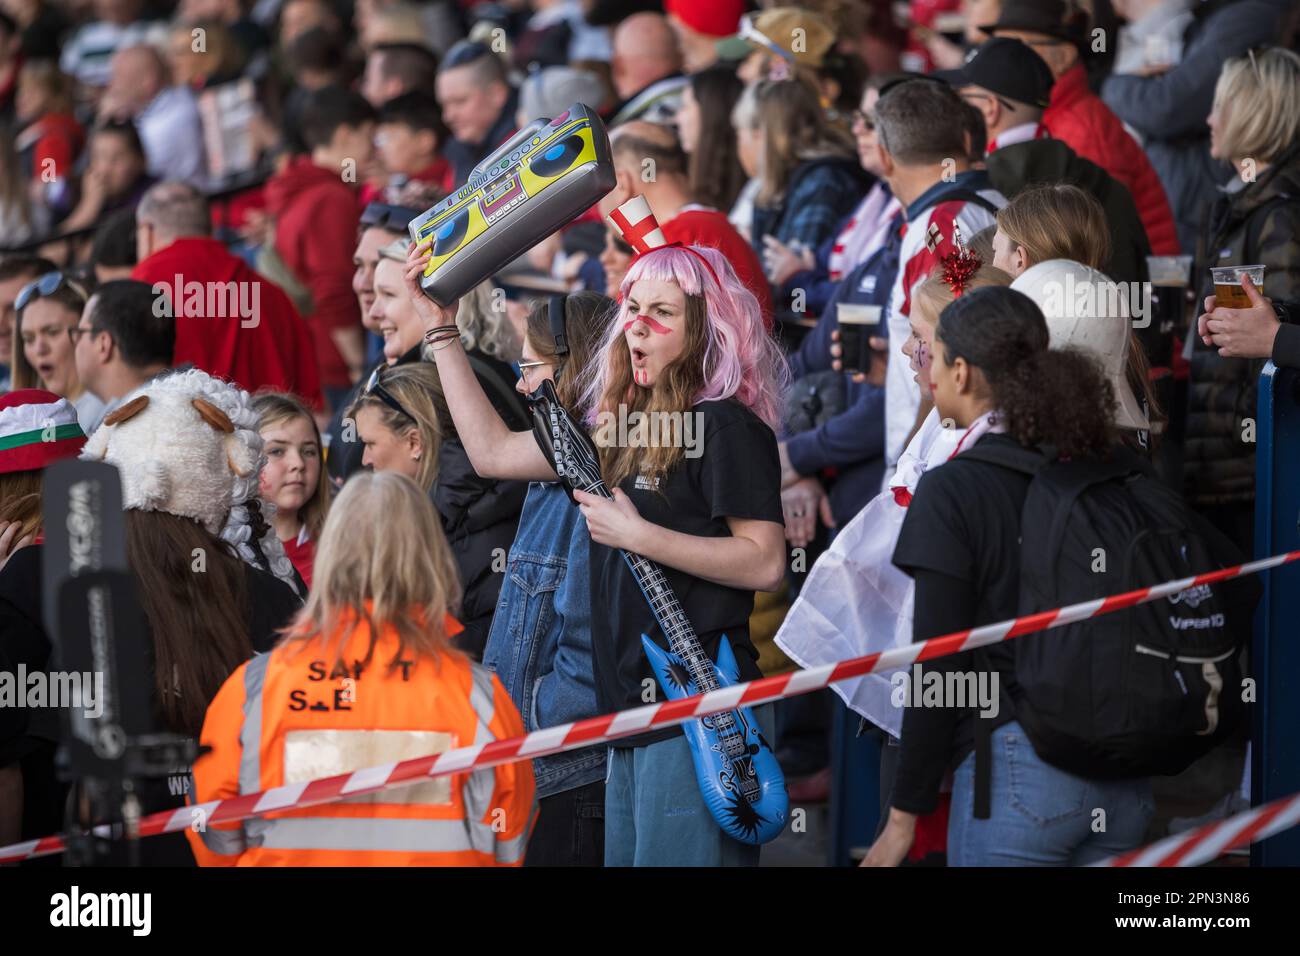 Cardiff, Wales. 15th April 2023. Spectators during the TikTok Women’s Six Nations rugby match, Wales versus England at Cardiff Park Arms Stadium in Cardiff, Wales. Credit: Sam Hardwick/Alamy Live News. Stock Photo